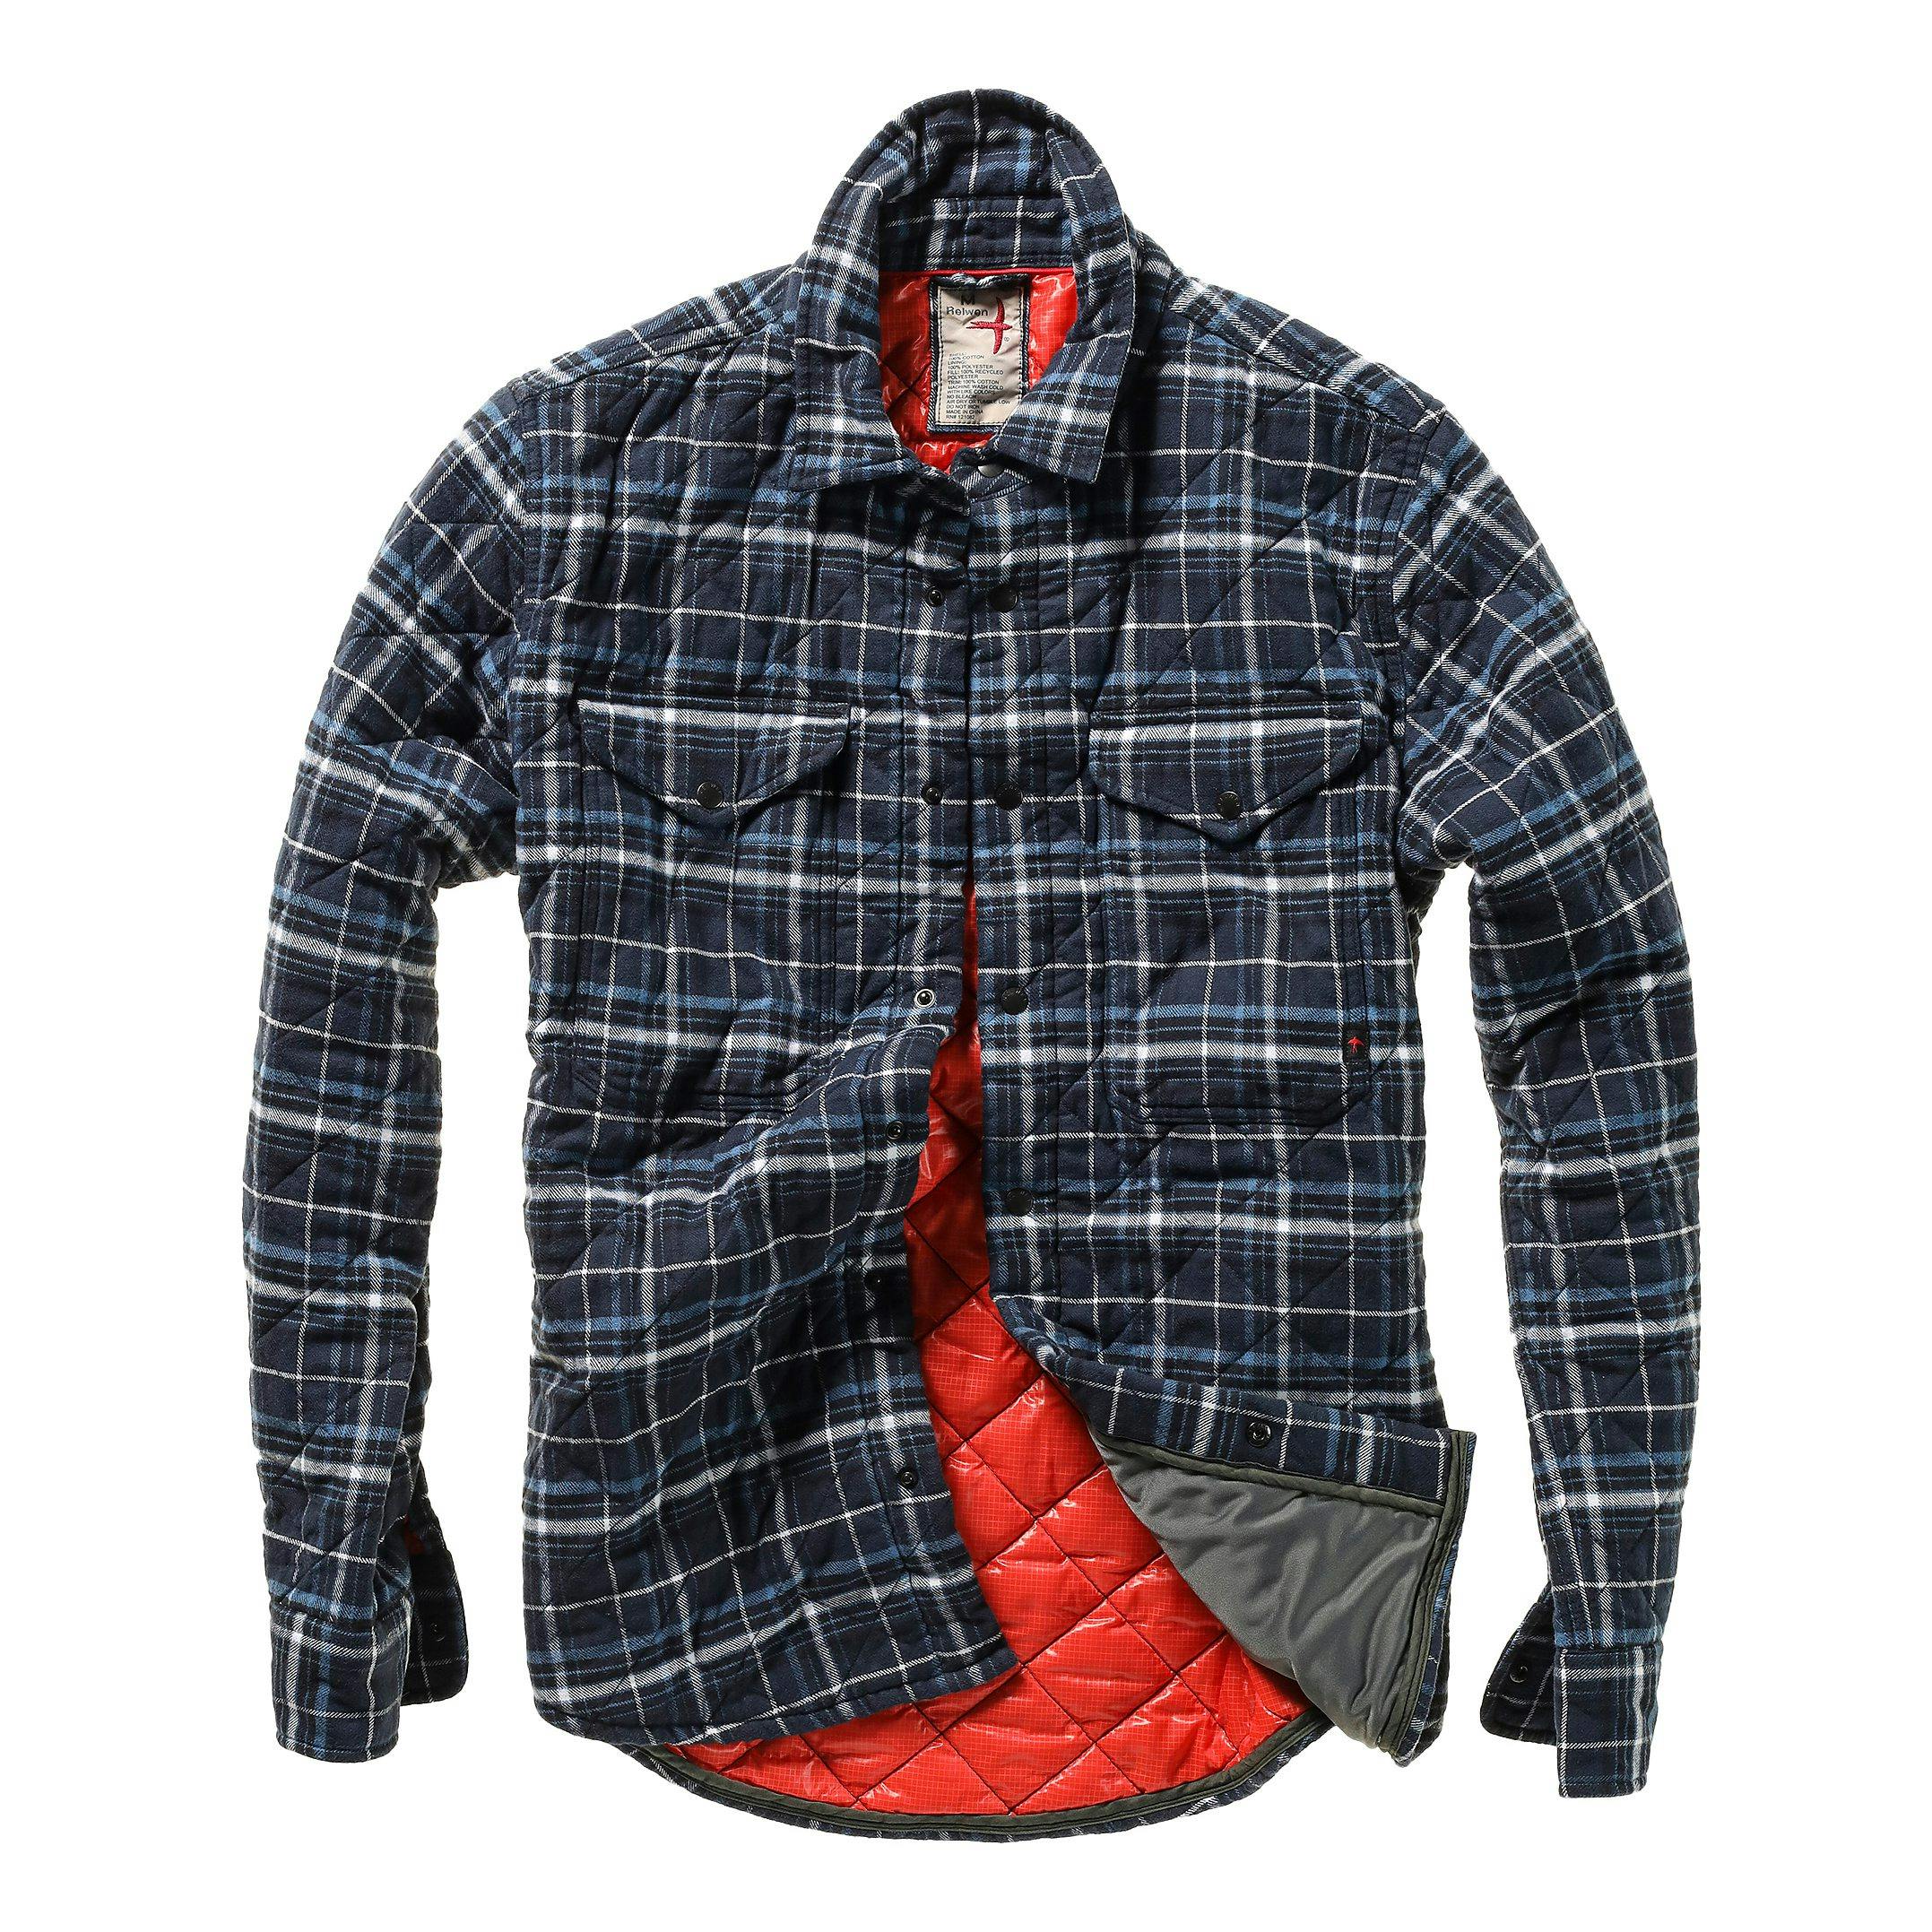 How to Wear a Flannel for Men  Styling Flannel Shirts - Nimble Made